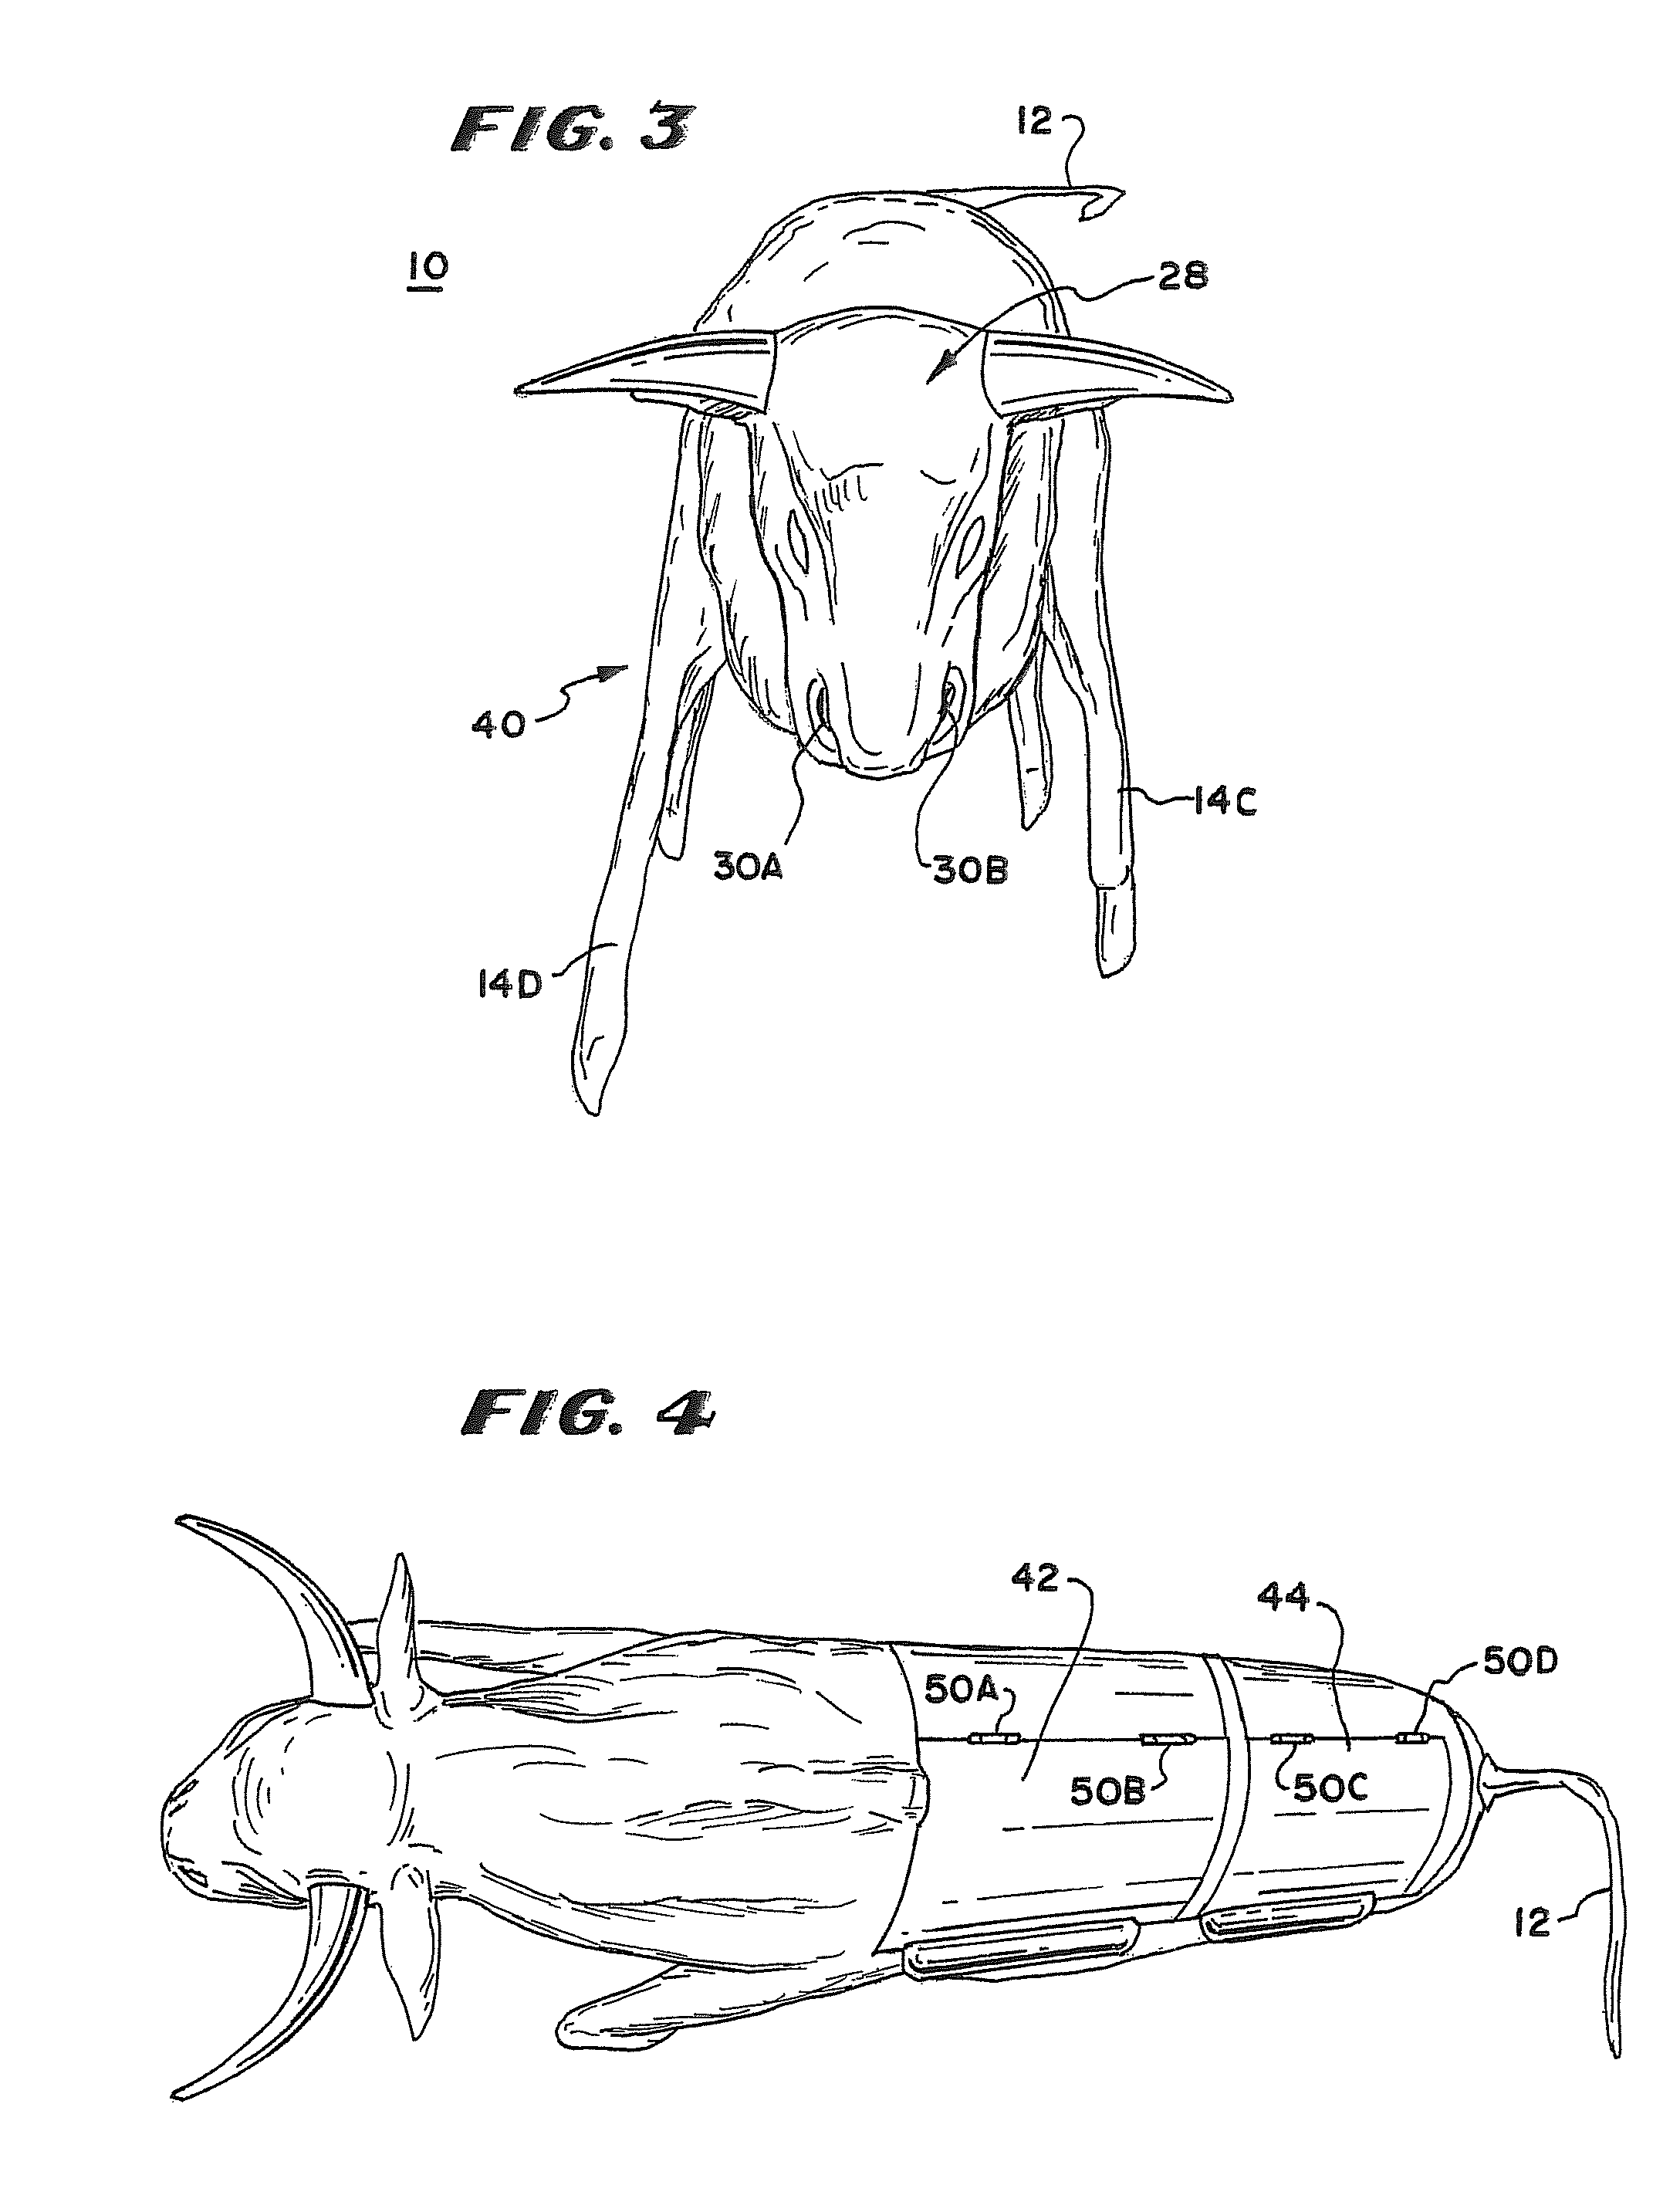 Meat treatment apparatus and method